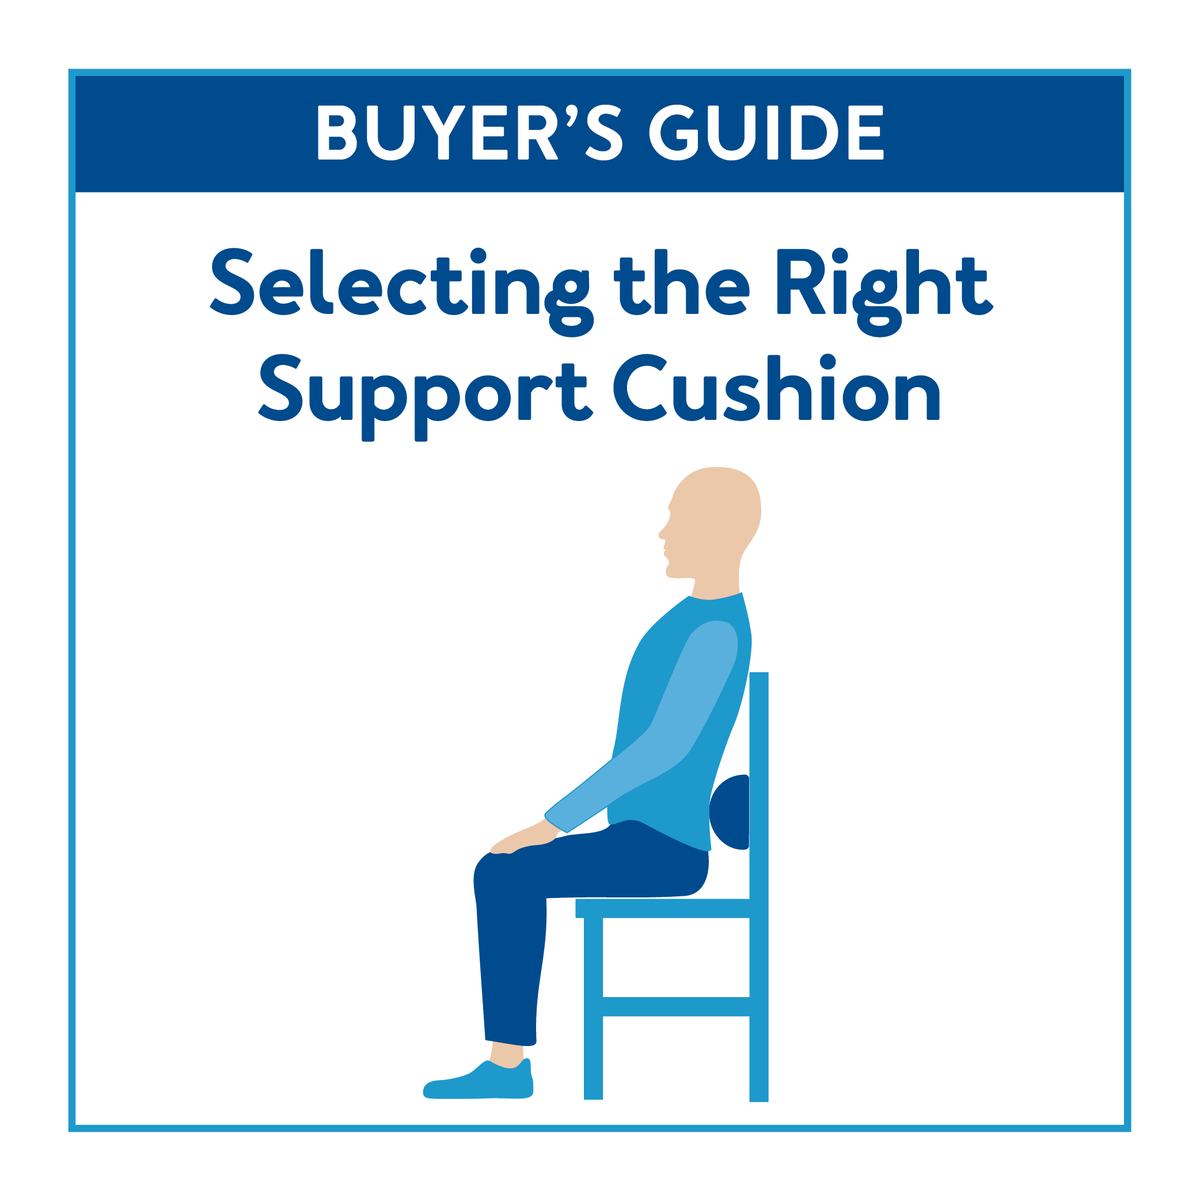  A buyer’s guide cover image with a cartoon person sitting. Text,Buyer’s Guide: Selecting the Right Support Cushion.